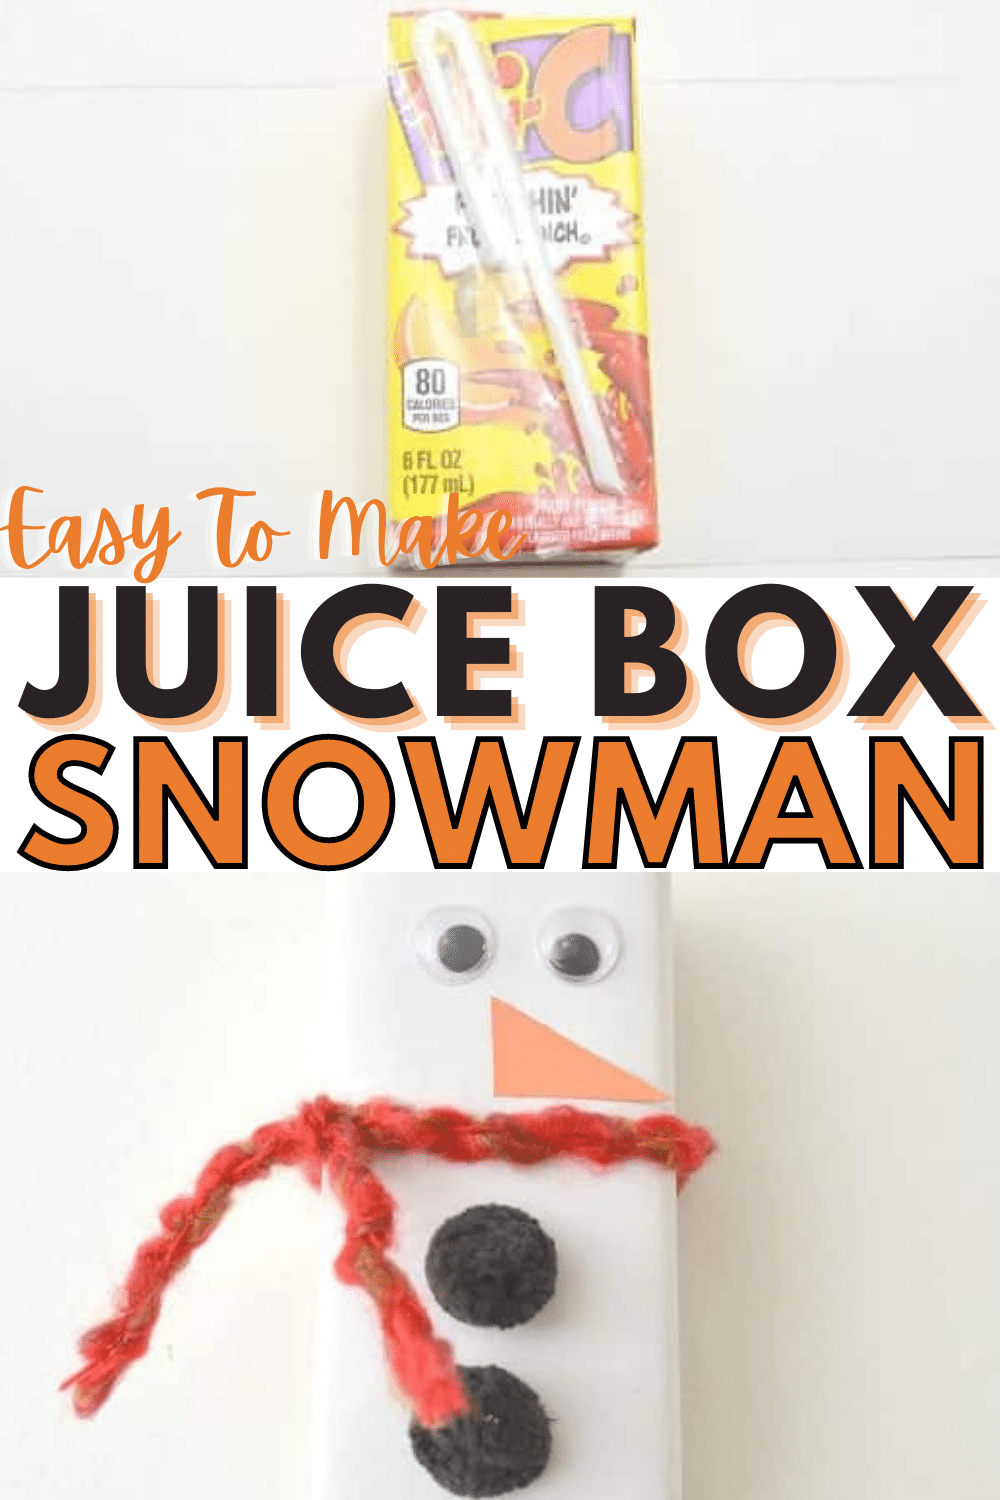 A few simple craft supplies and a juice box is all it takes to make this Juice Box Snowman that will delight your child. It's fast and easy to make too! #forkids #snowman #craft #diy via @wondermomwannab